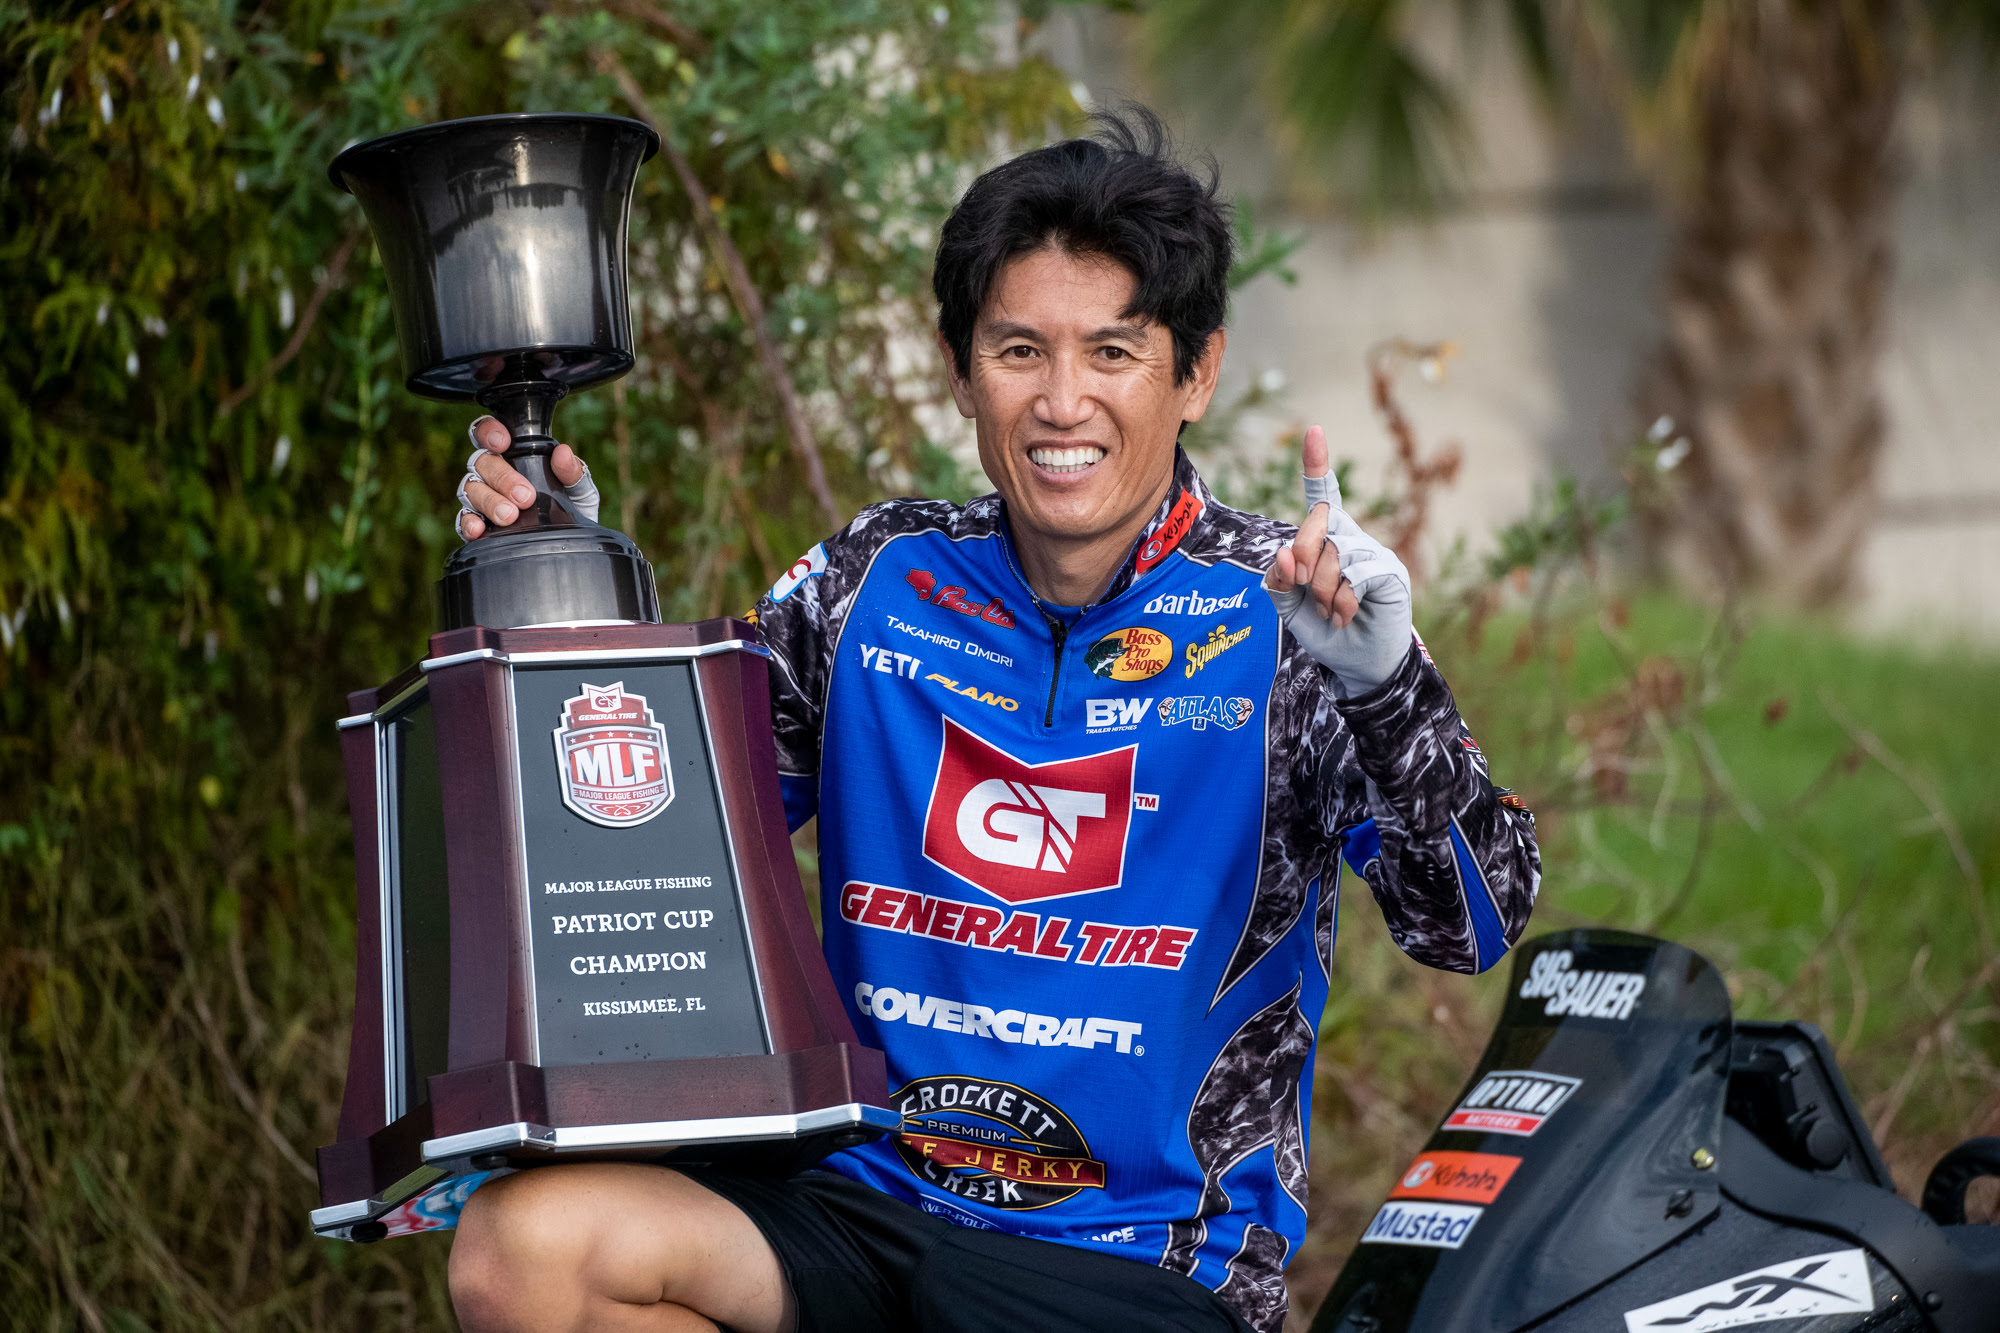 Find Out How Takahiro Omori Won the 2021 MLF USAA Patriot Cup